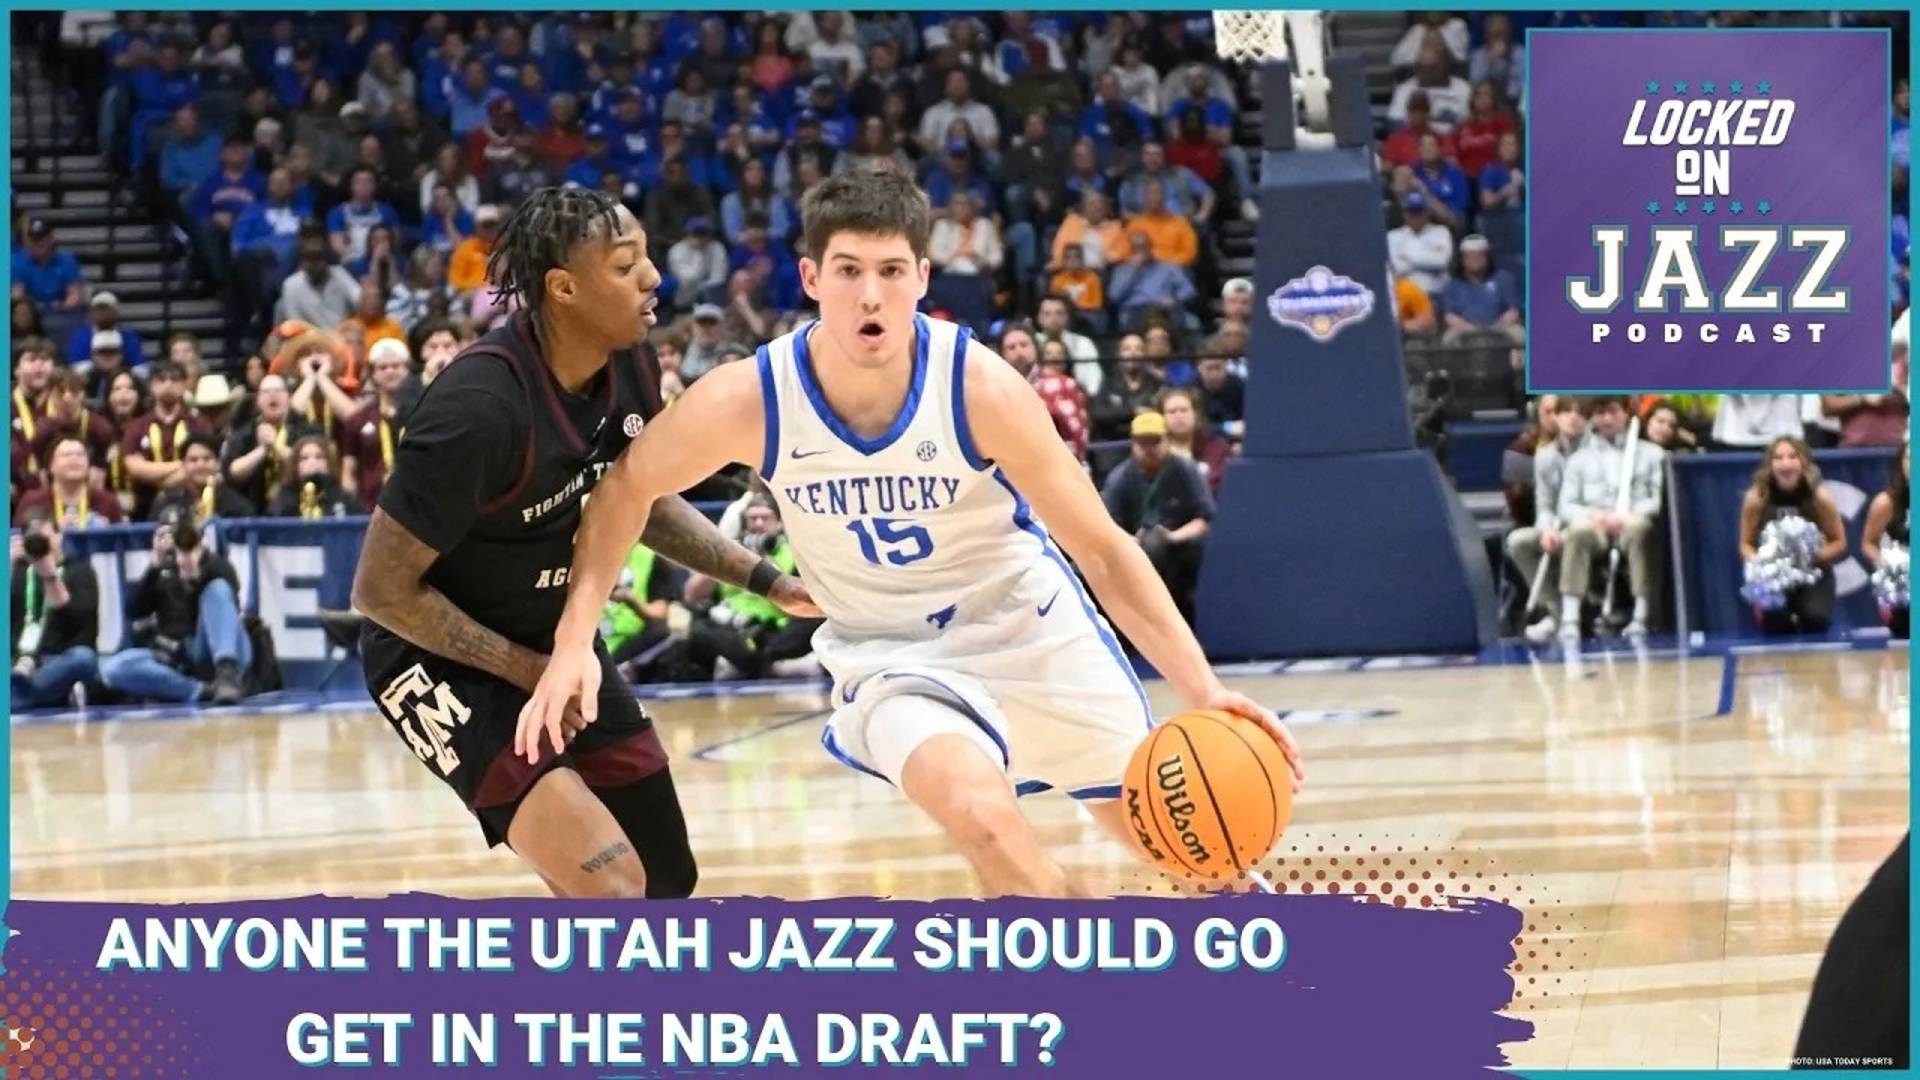 Nikola Topic was headed toward being a top 5 pick and maybe even the #1 pick.  The U18 FIBA MVP is a 6'6 point guard playing in the Adratic League.